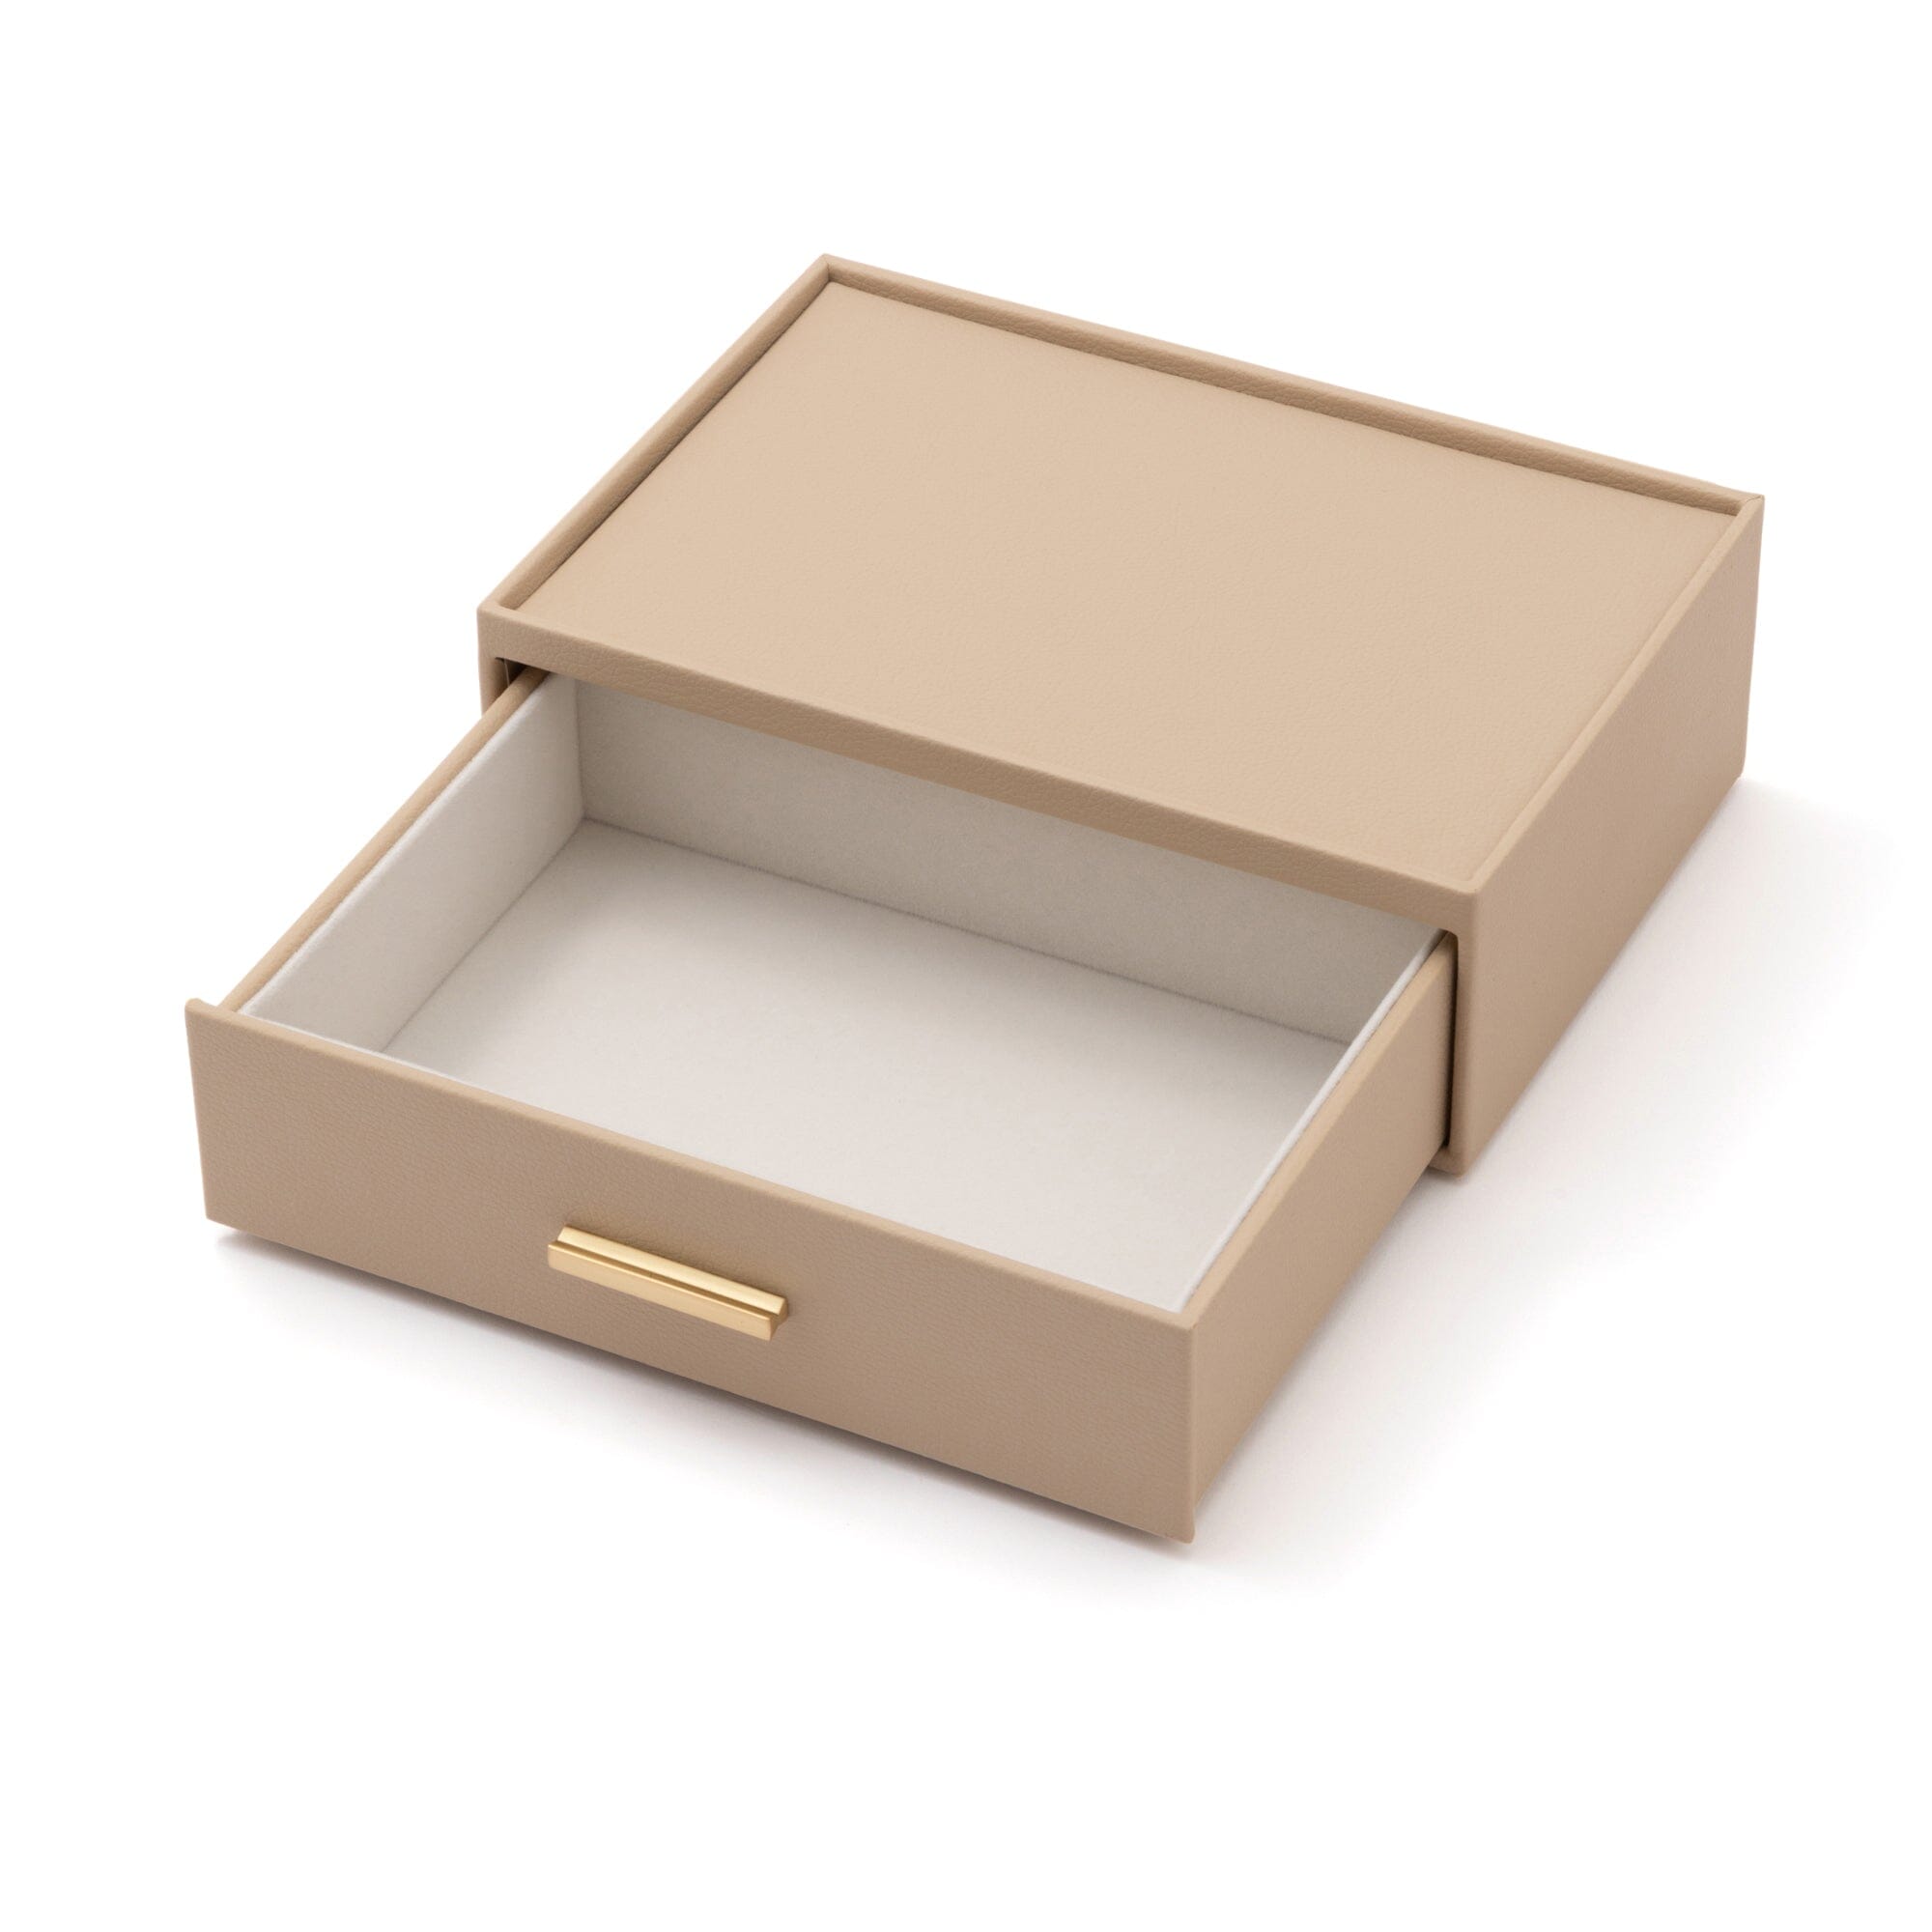 Stacking Jewelry box Open L Beige